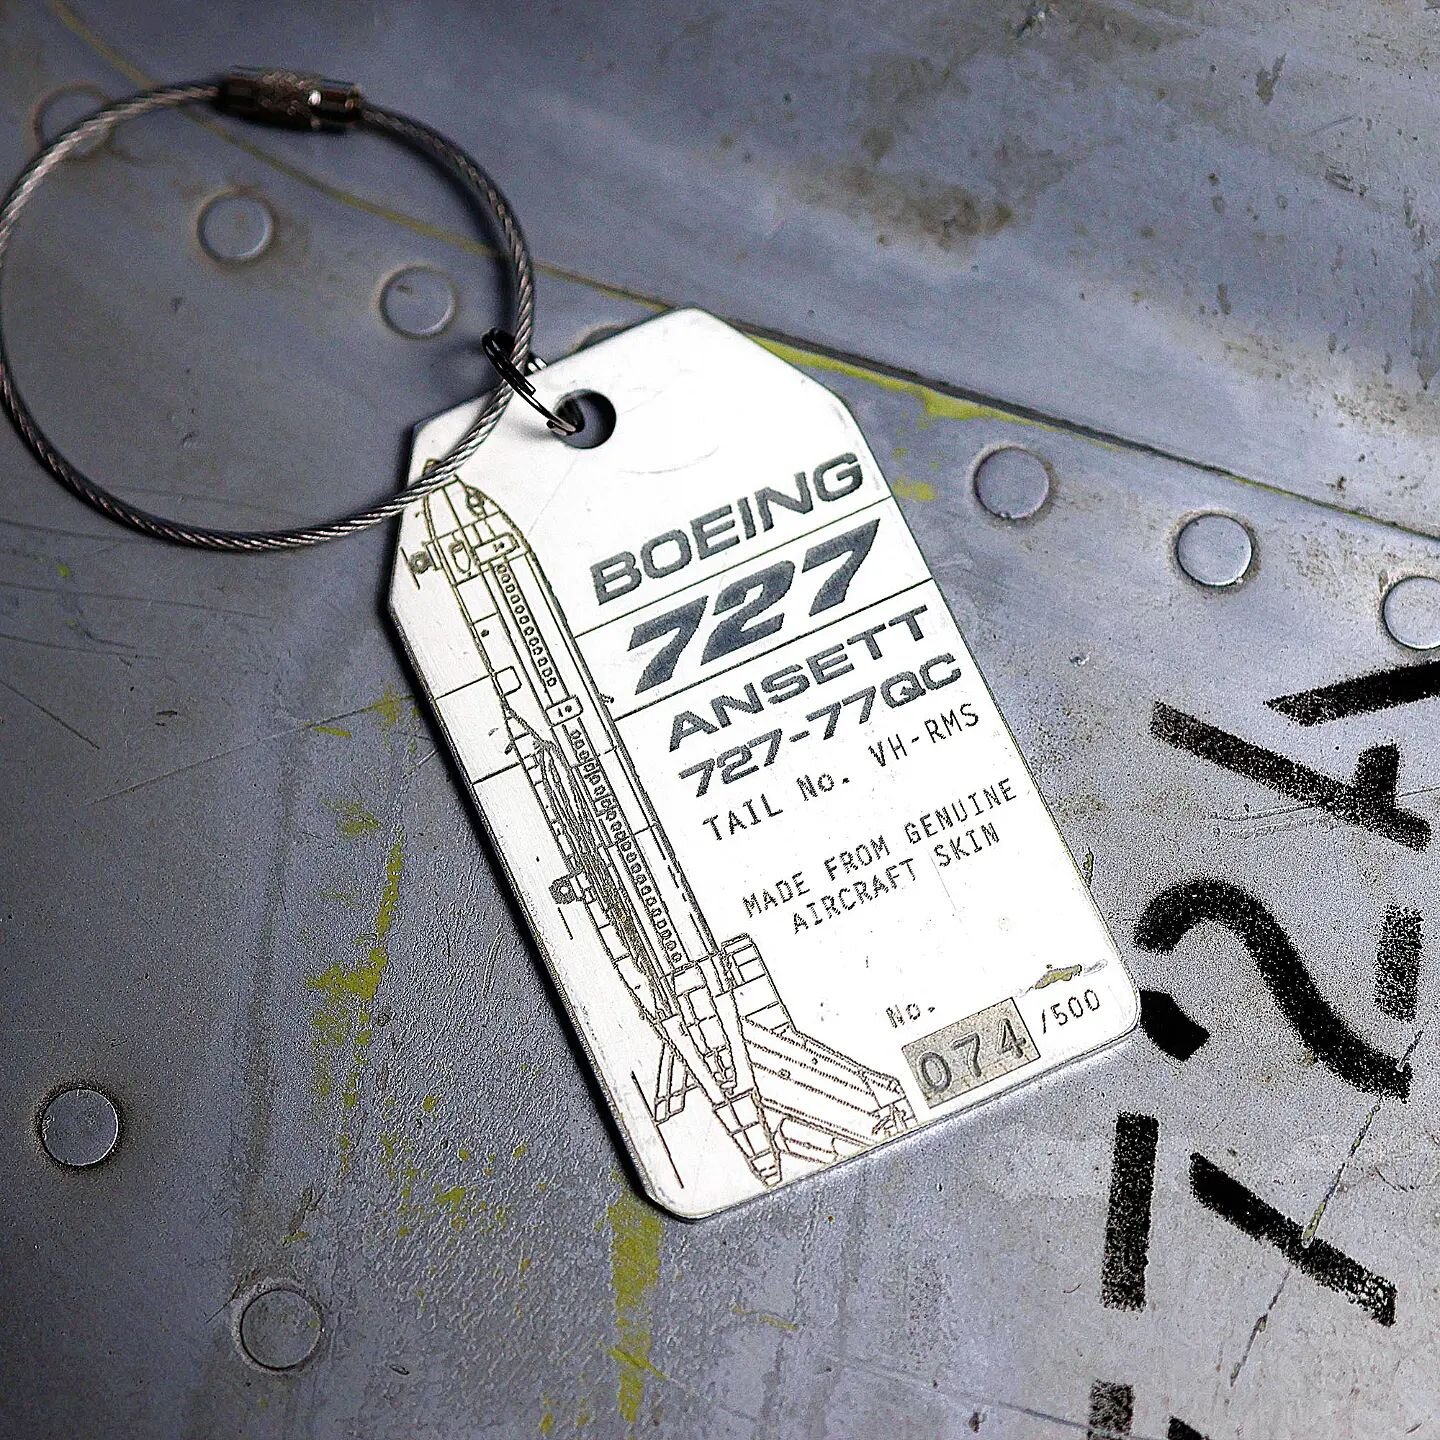 #reclaimed #aircraft skin key rings made from ex-Ansett #boeing727 tail No. VH-TBS 

Key rings available for purchase from Relic Design &amp; Craft co website and etsy page.

#relicdesignandcraftco #ansettaustralia #taa #boeing #keyrings #keyring #ai